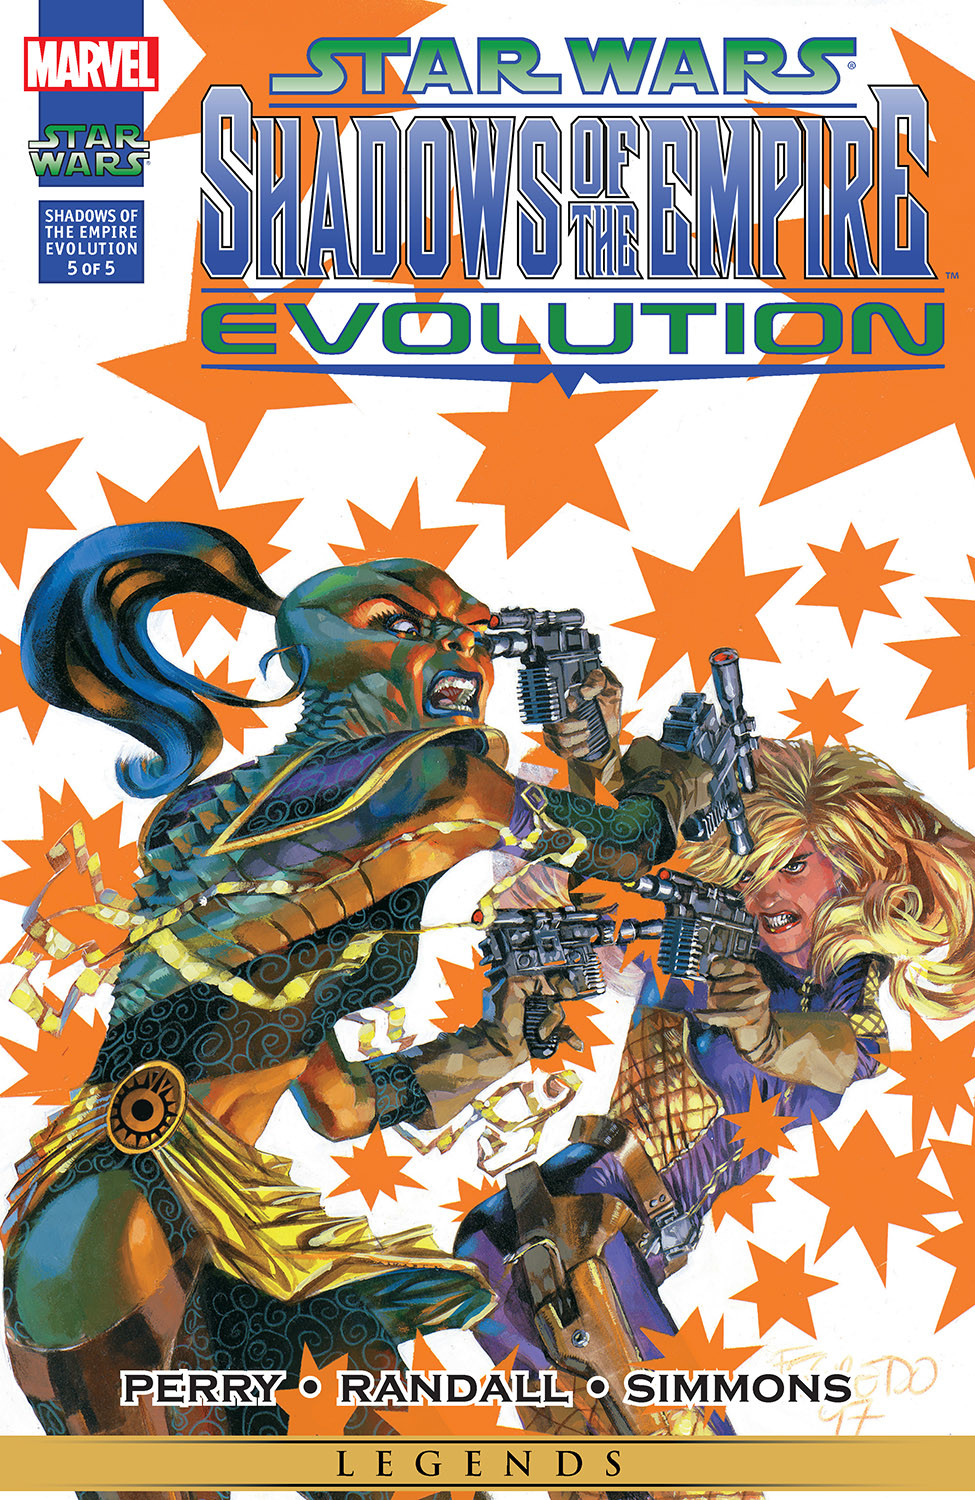 Read online Star Wars: Shadows of the Empire - Evolution comic -  Issue #5 - 1